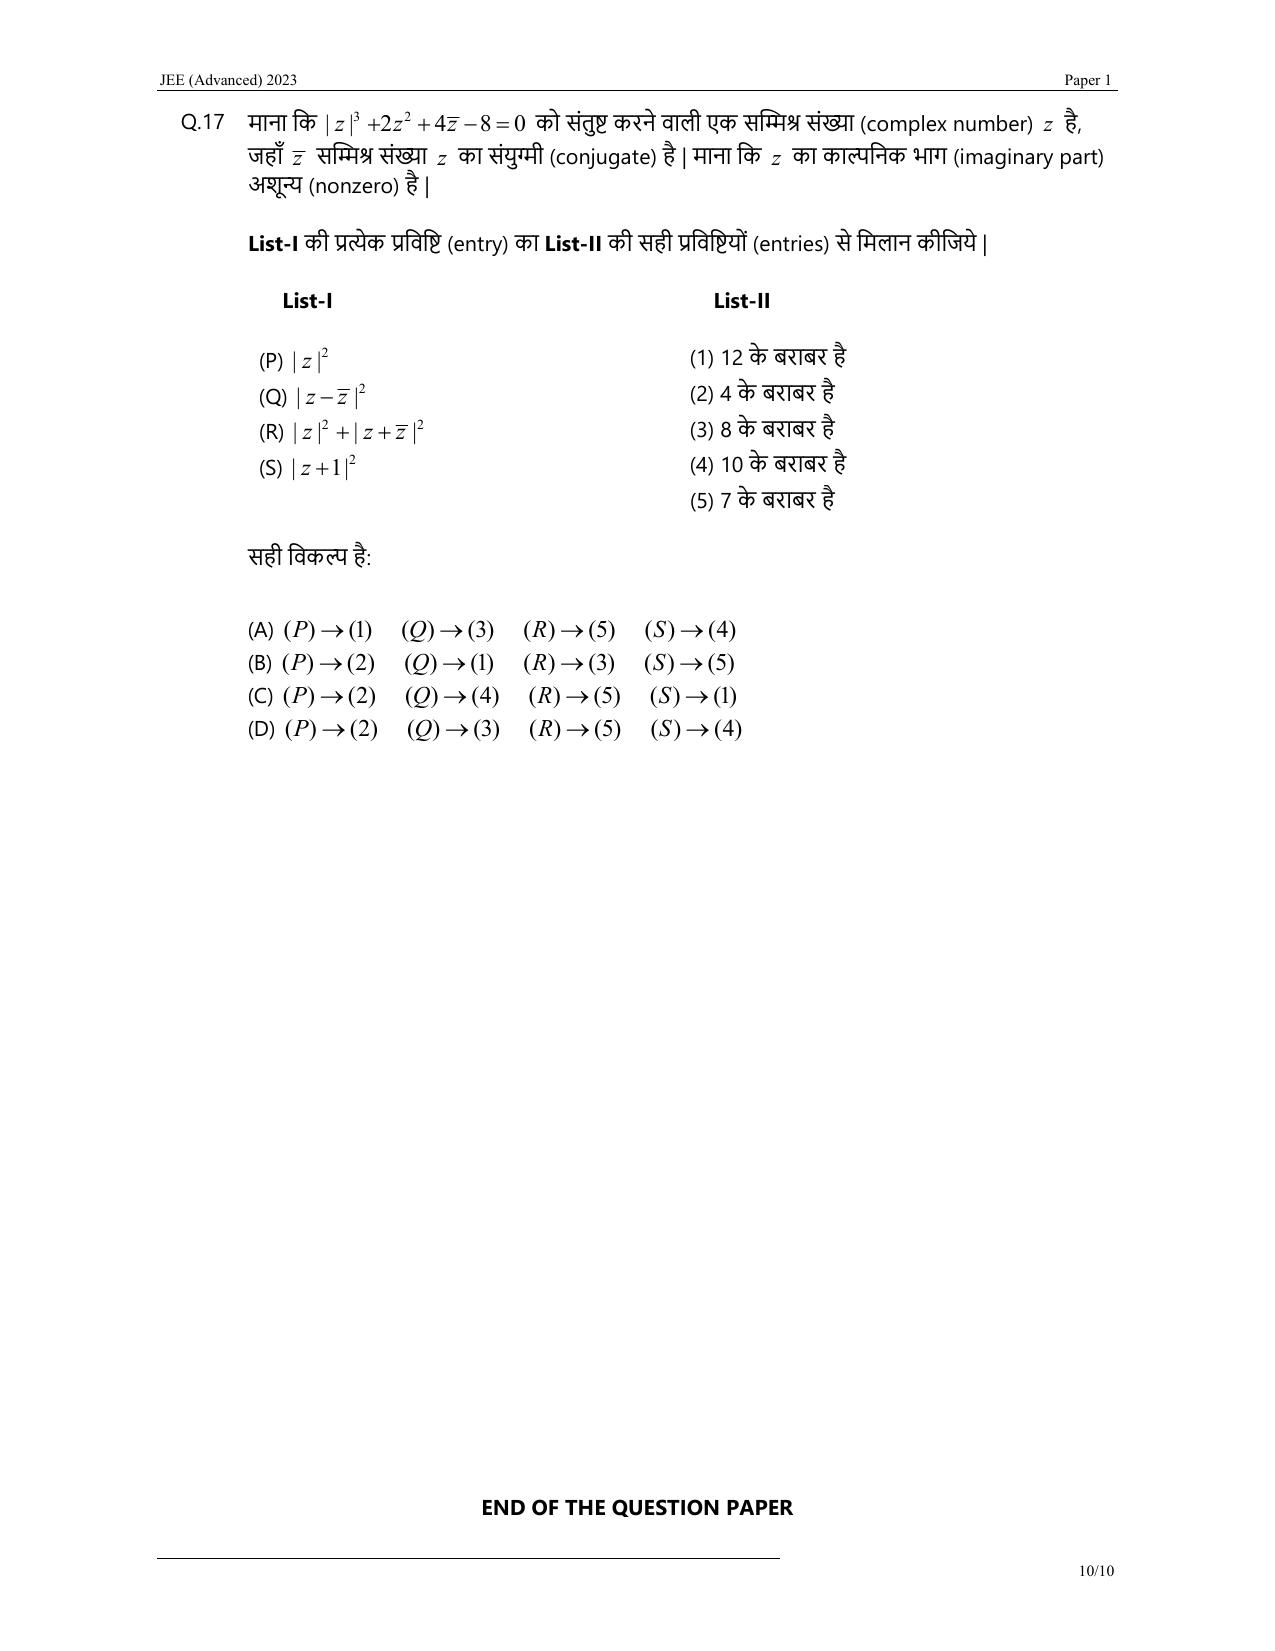 JEE Advanced 2023 Question Paper 1 (Hindi) - Page 10